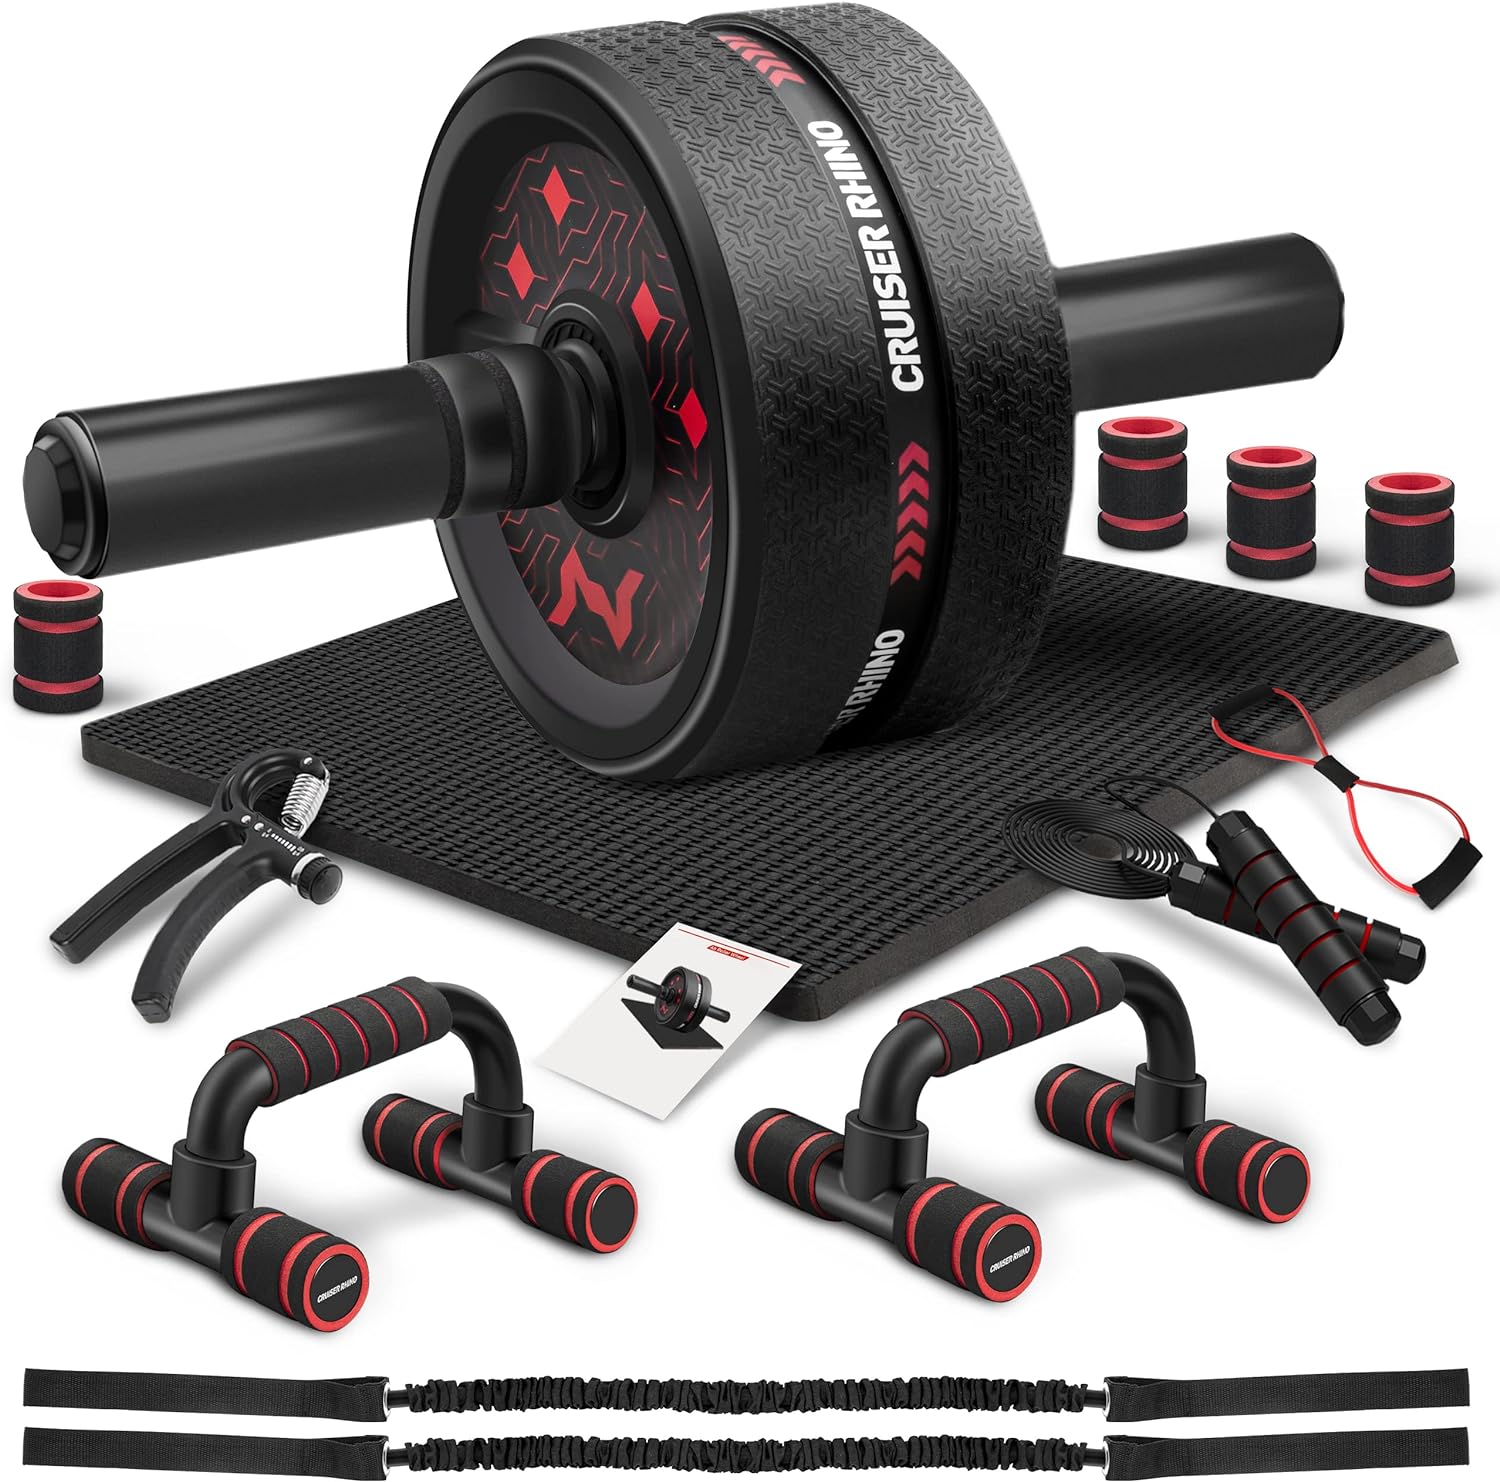 Ab Workout Equipment Review